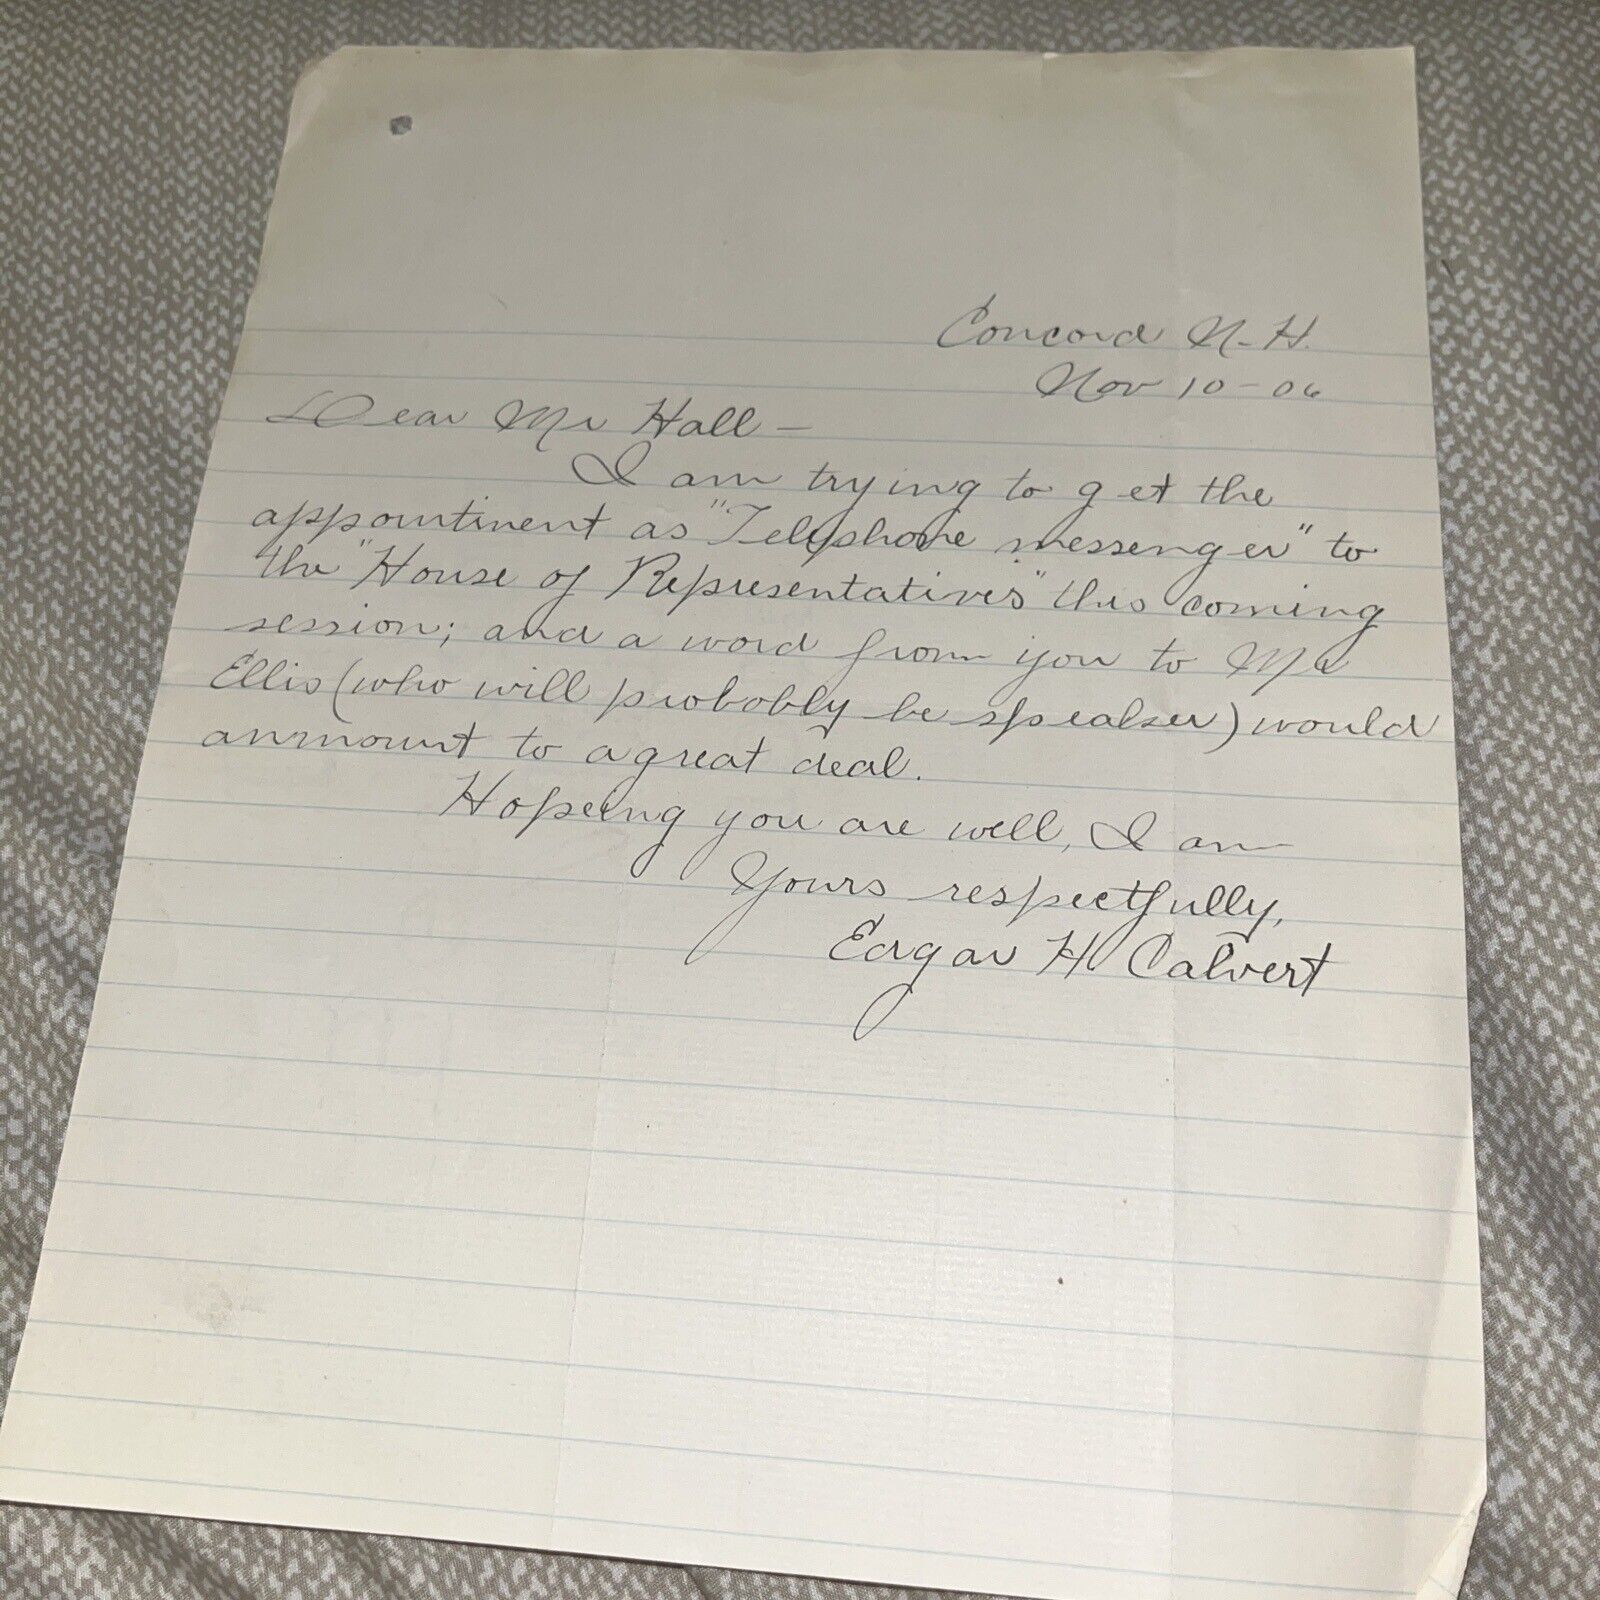 Antique 1906 Concord NH Letter Requesting Endorsement to Speaker of the House